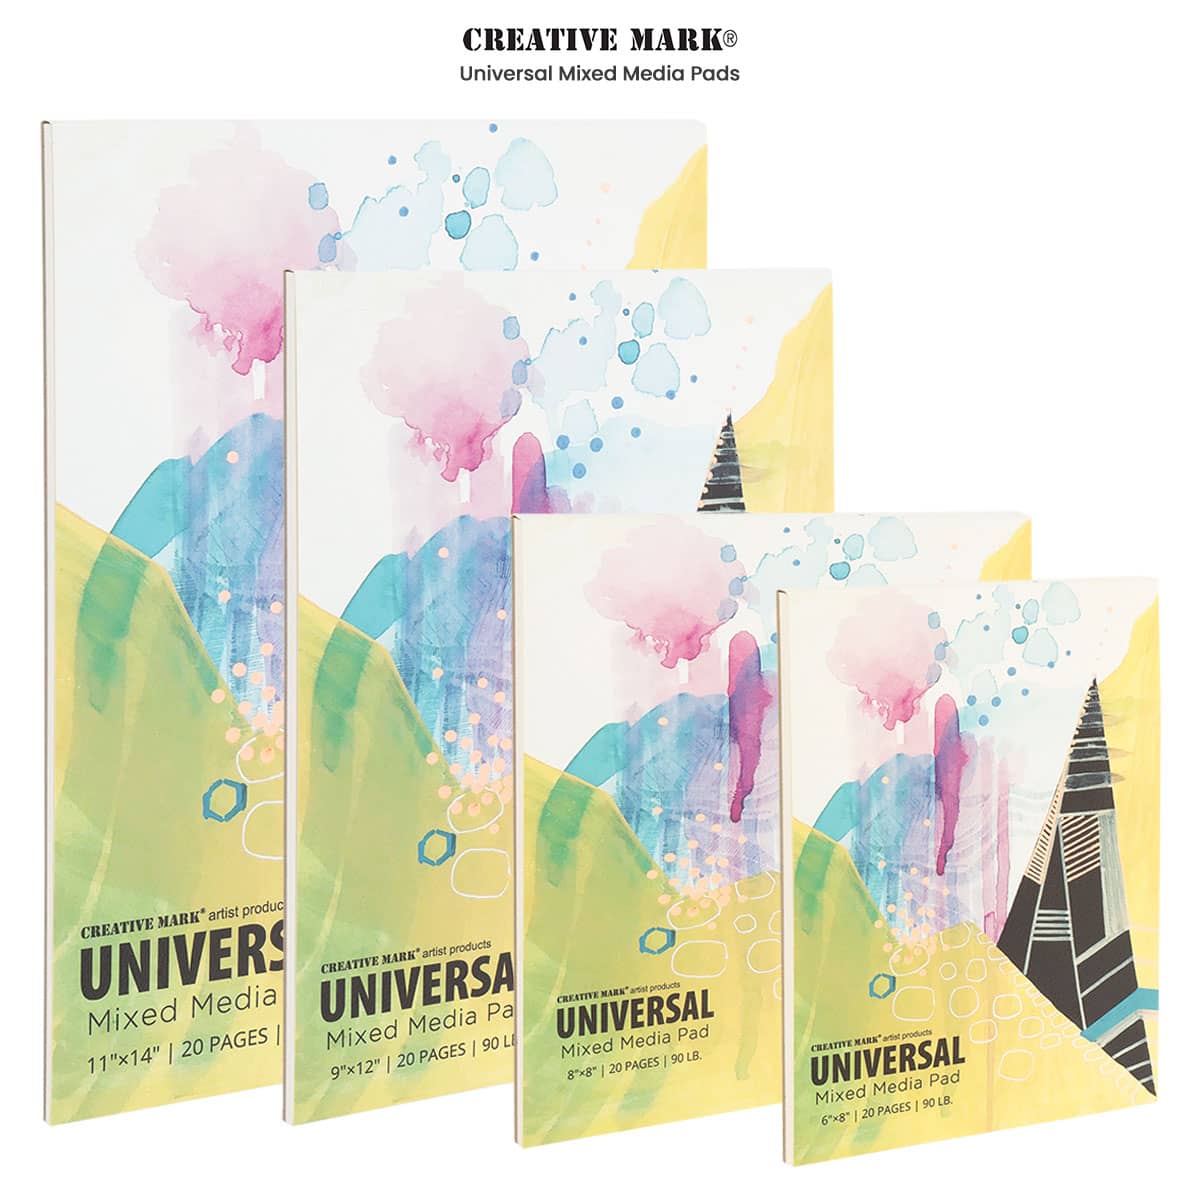 Universal Mixed Media Pads by Creative Mark